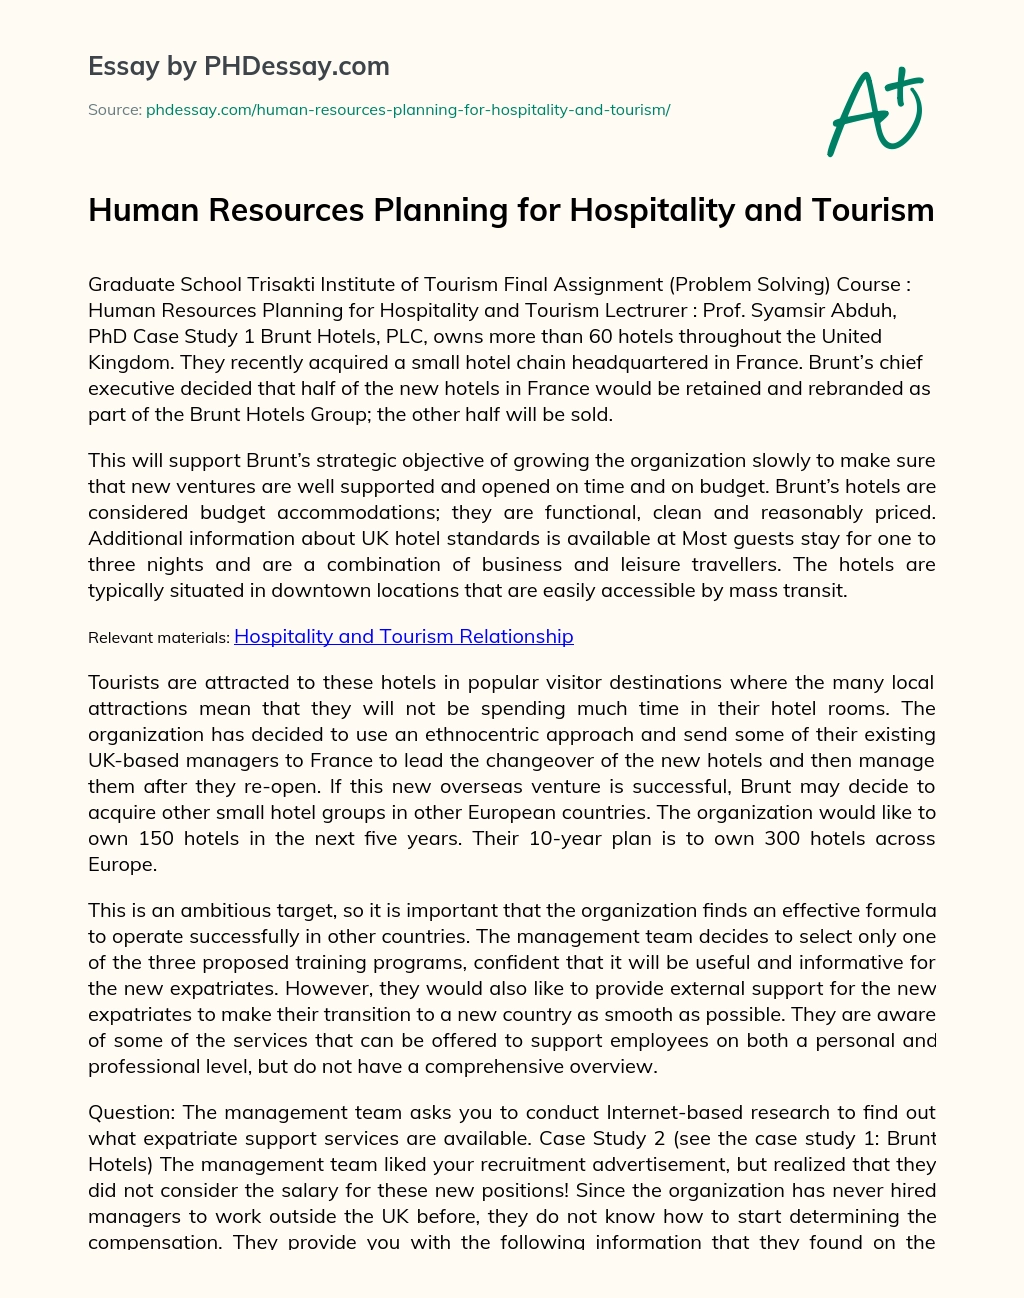 Human Resources Planning for Hospitality and Tourism essay